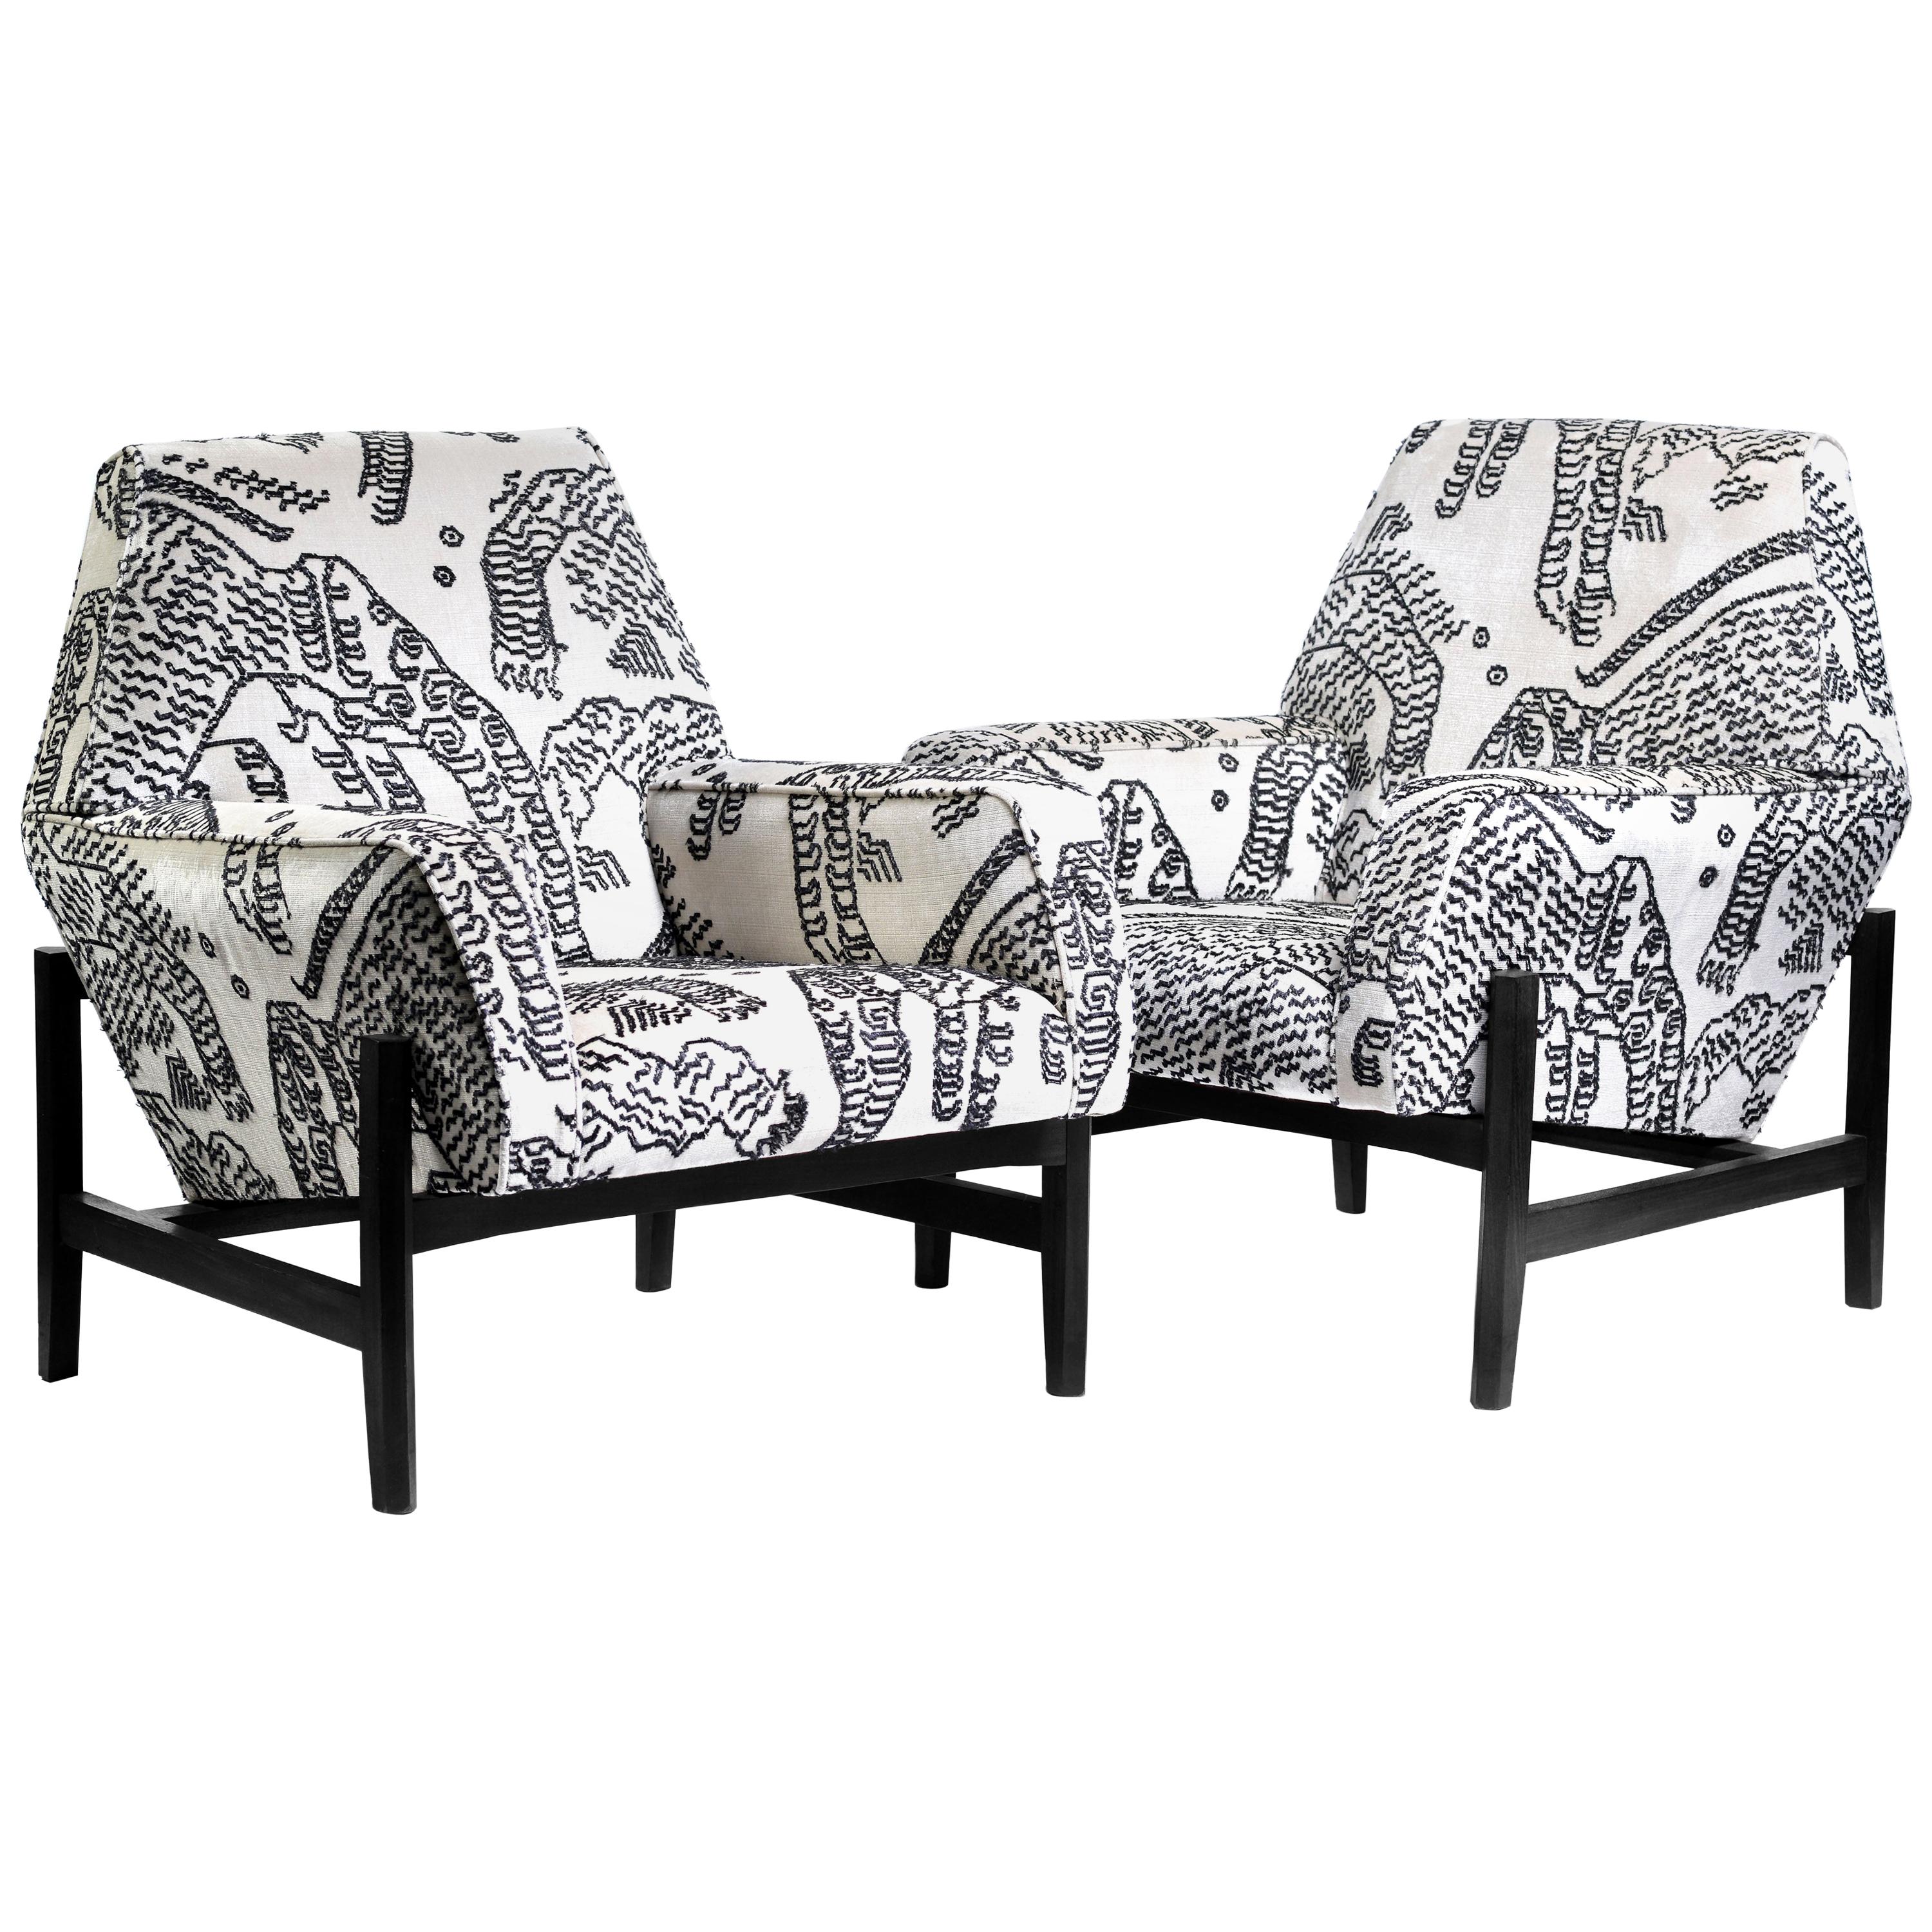 Pair of Midcentury Italian Chairs Upholstered in Black and White Dedar Fabric